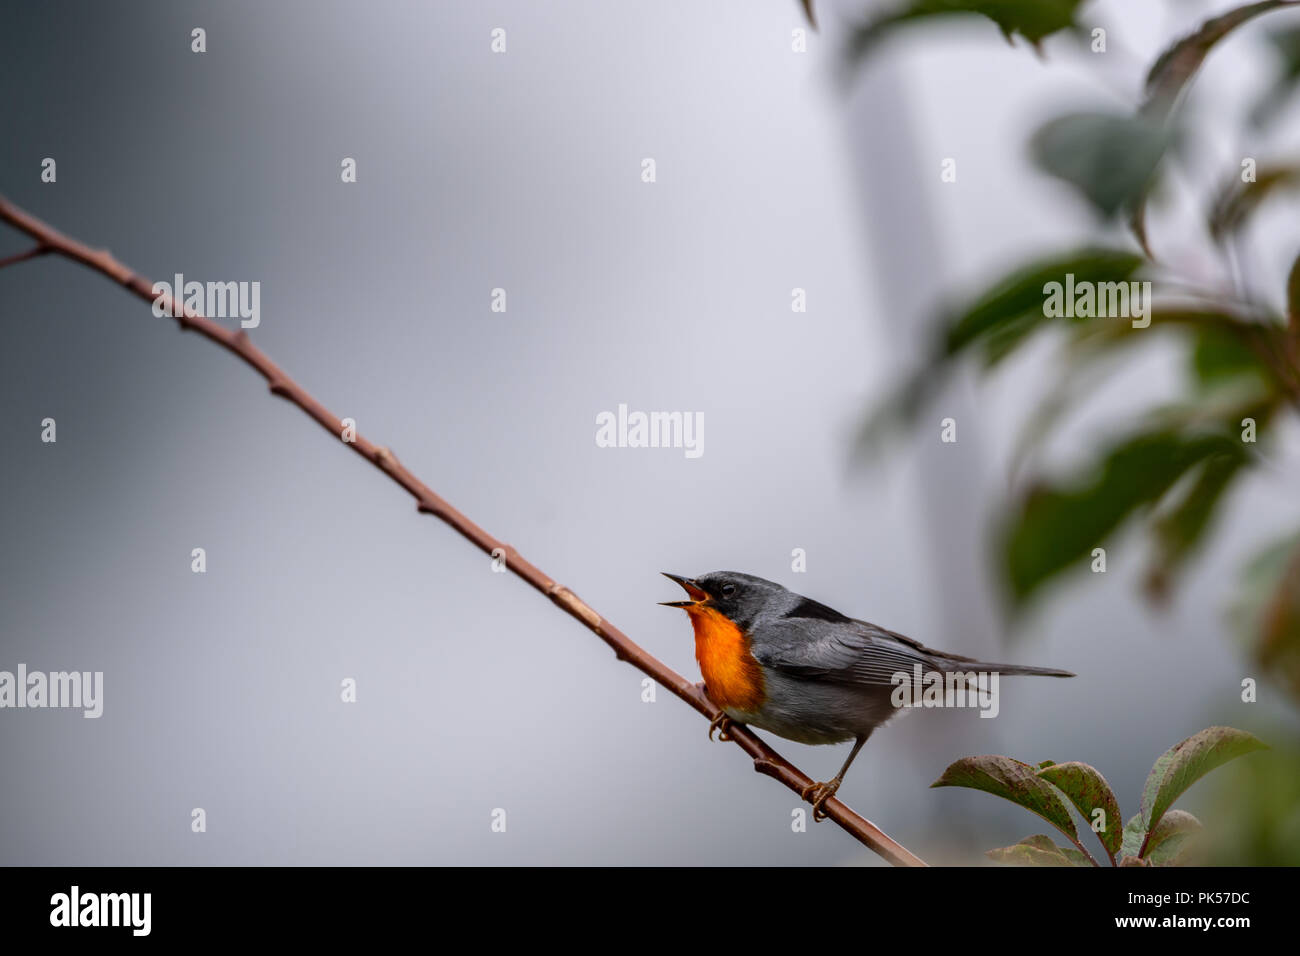 Flame-throated warbler (Oreothlypis gutturalis) in Costa Rica Stock Photo